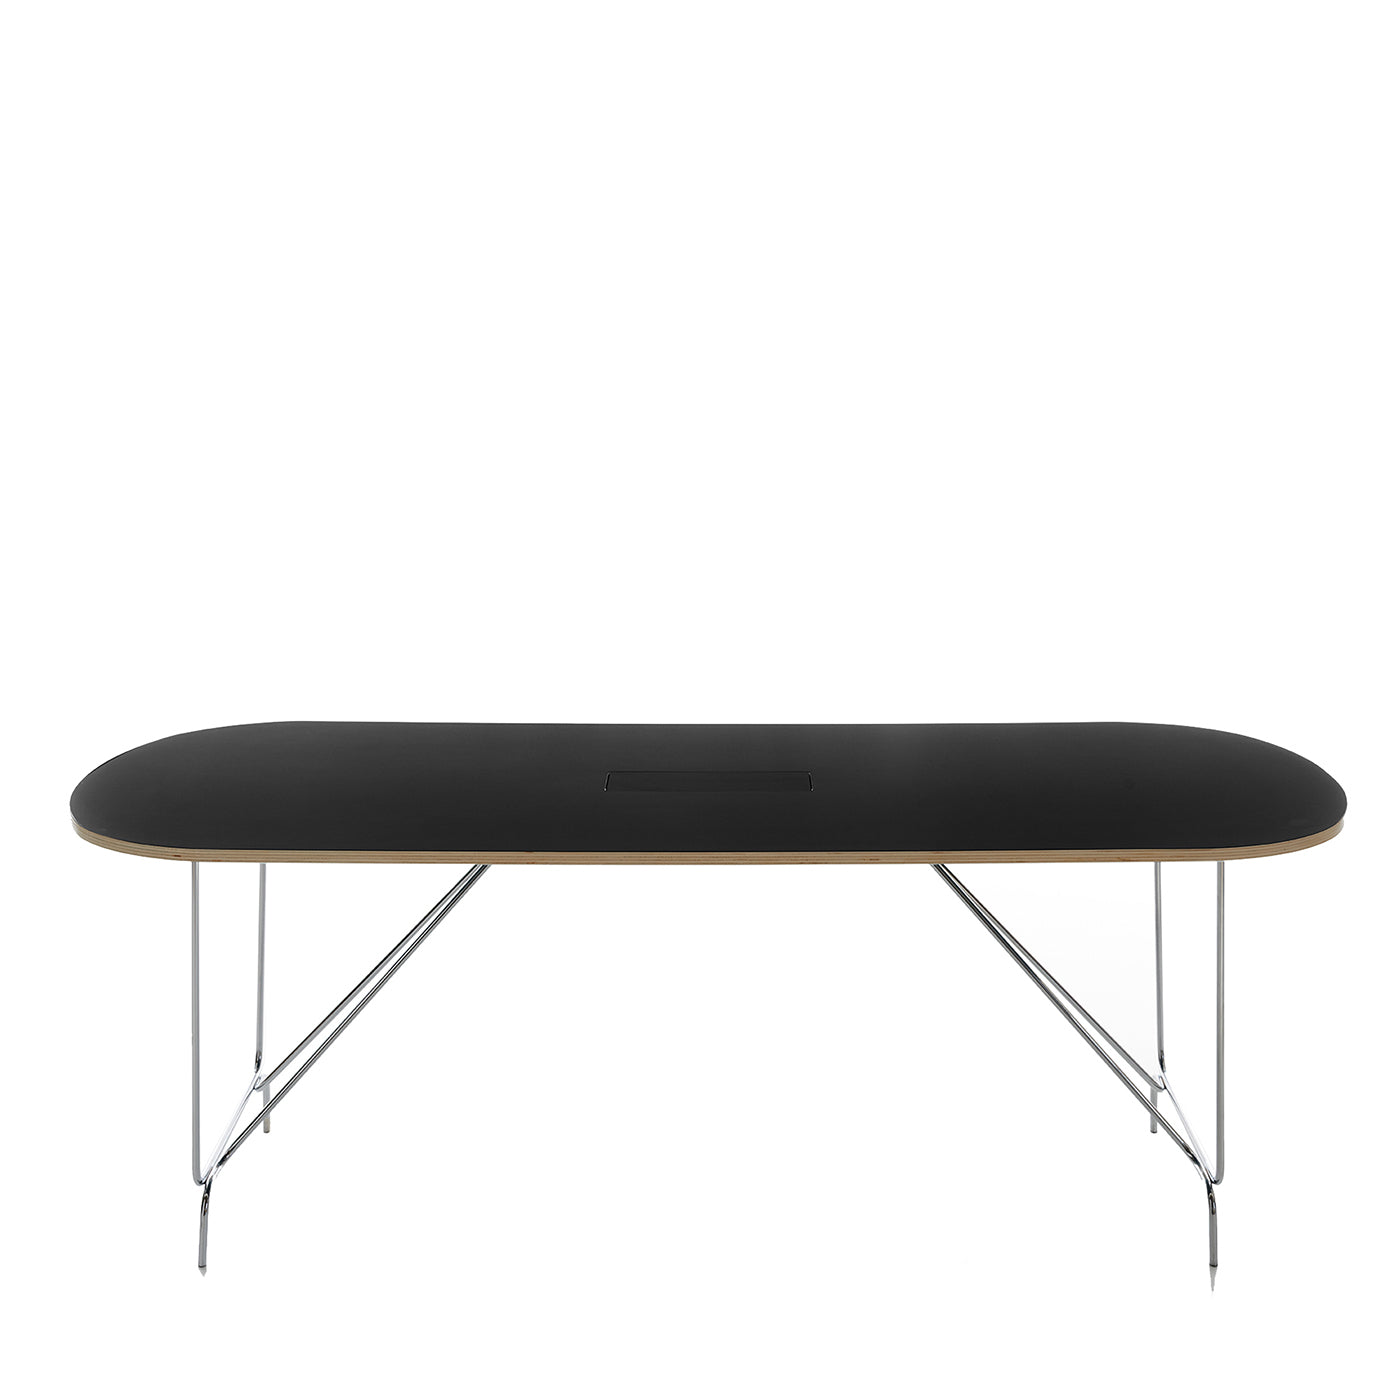 Litta Black Dining Table by R. Mangiarotti and I. Suppanen - Main view